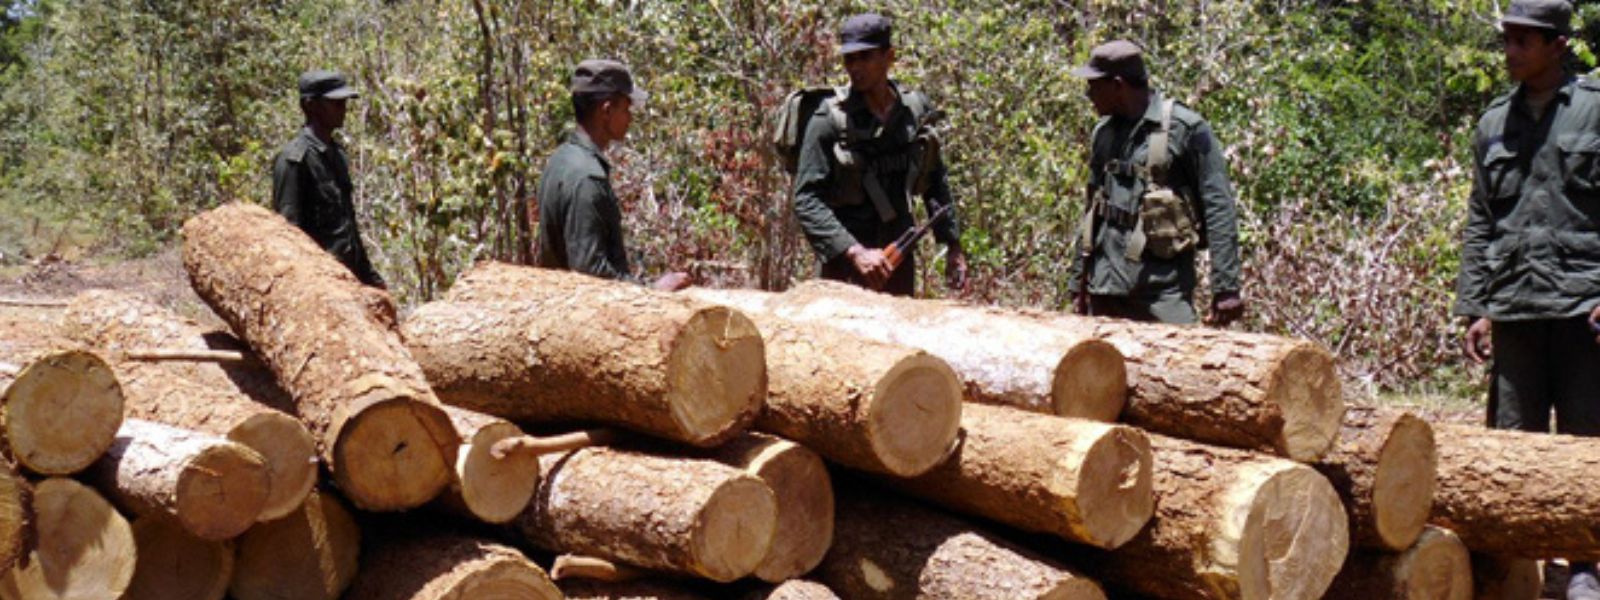 Over 100 arrests in protected areas